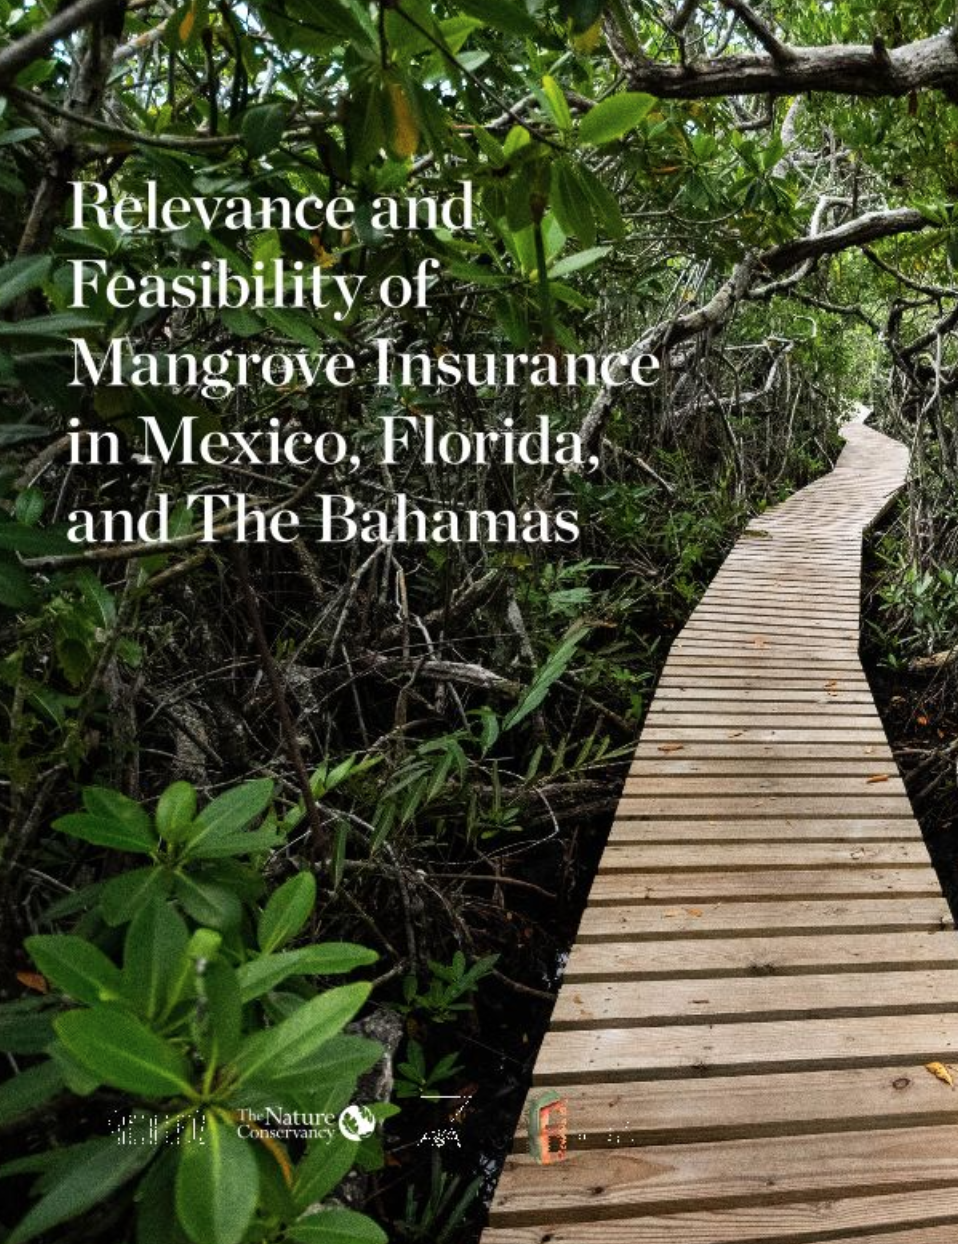 Boardwalk through mangroves curving out of sight in the distance with text that says Relevance and Feasibility of Mangrove Insurance in Mexico, Florida, and The Bahamas.